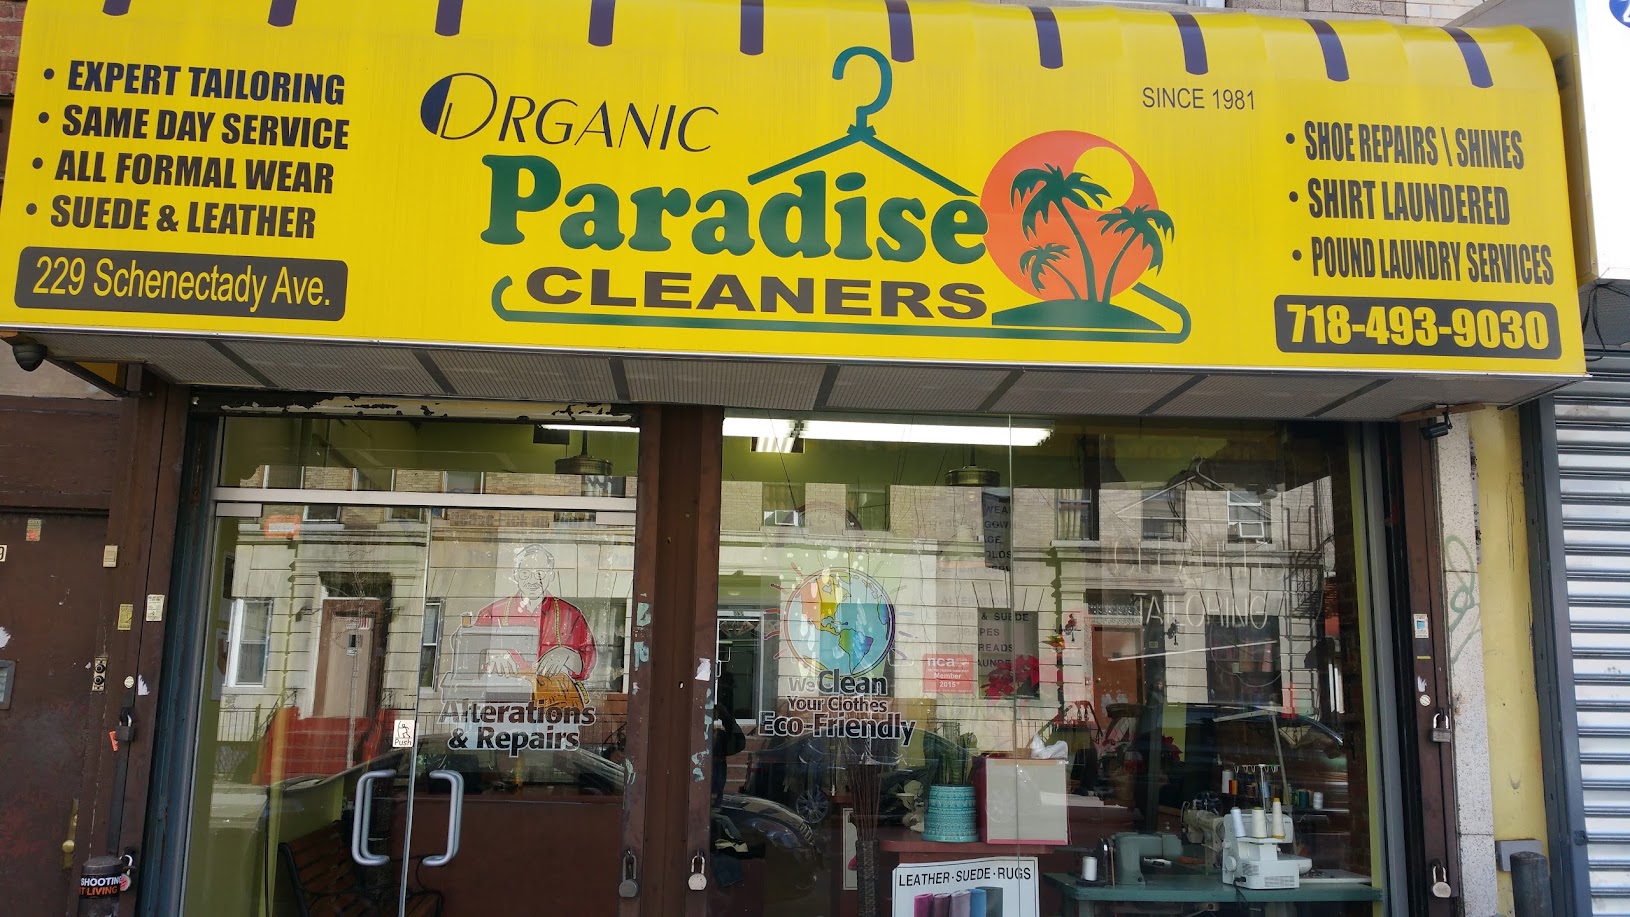 ORGANIC PARADISE CLEANERS